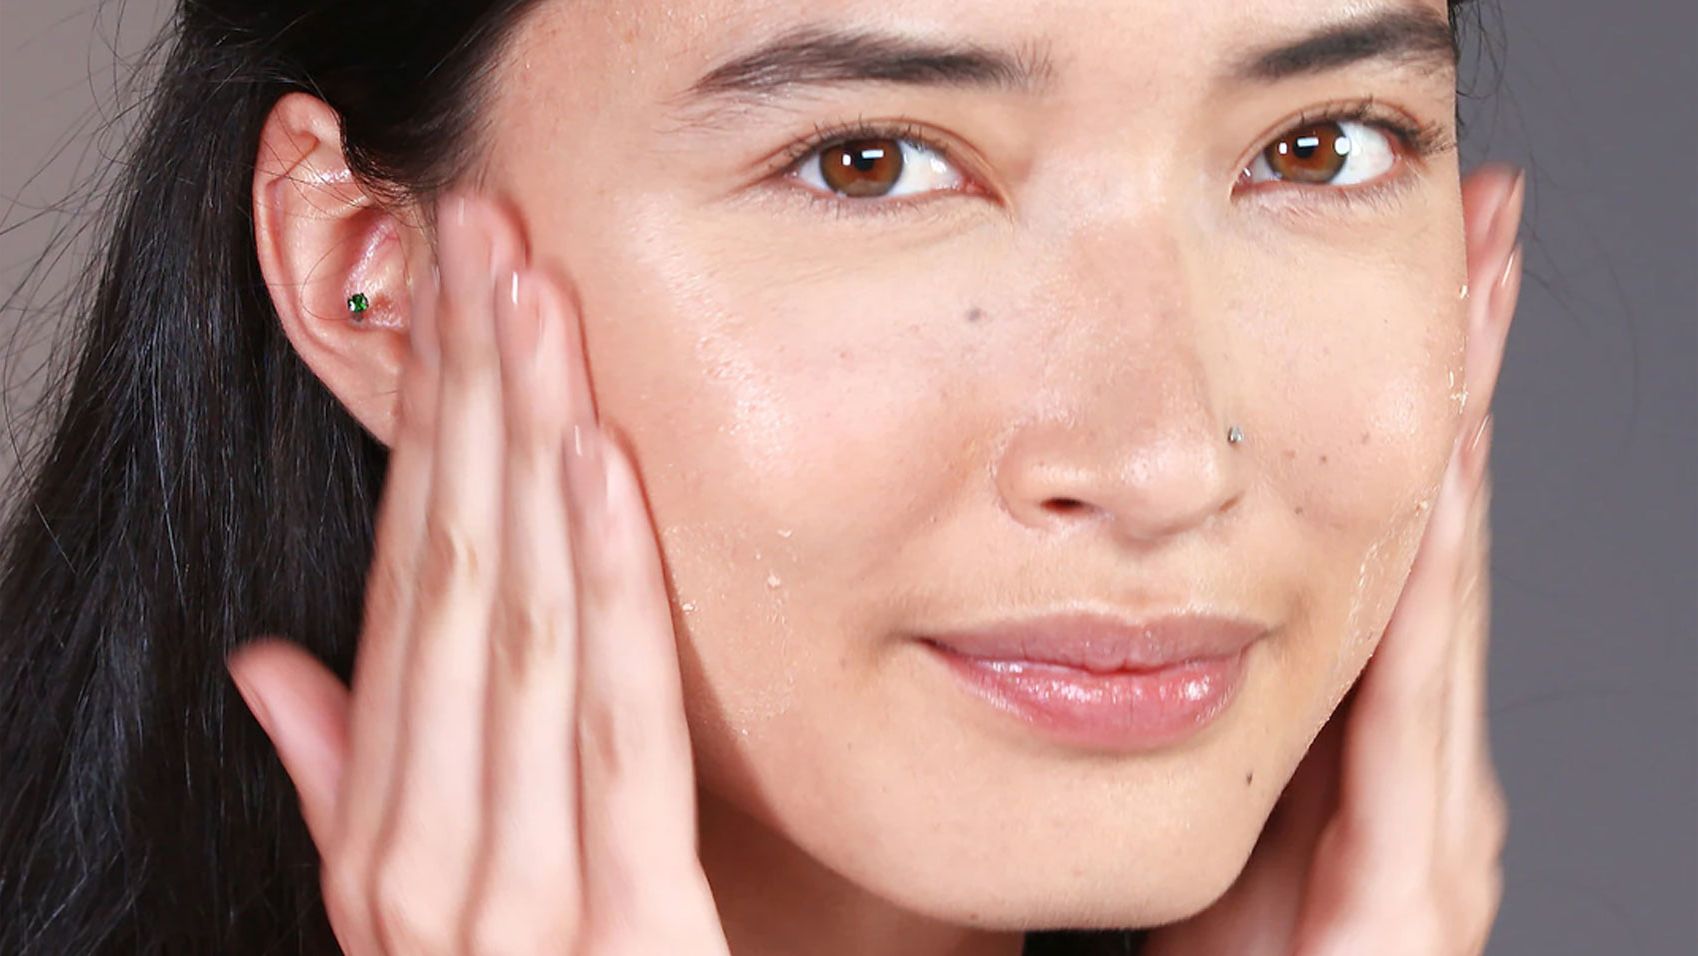 Get Beautiful Skin While You Sleep With These 5 Overnight Face Masks!